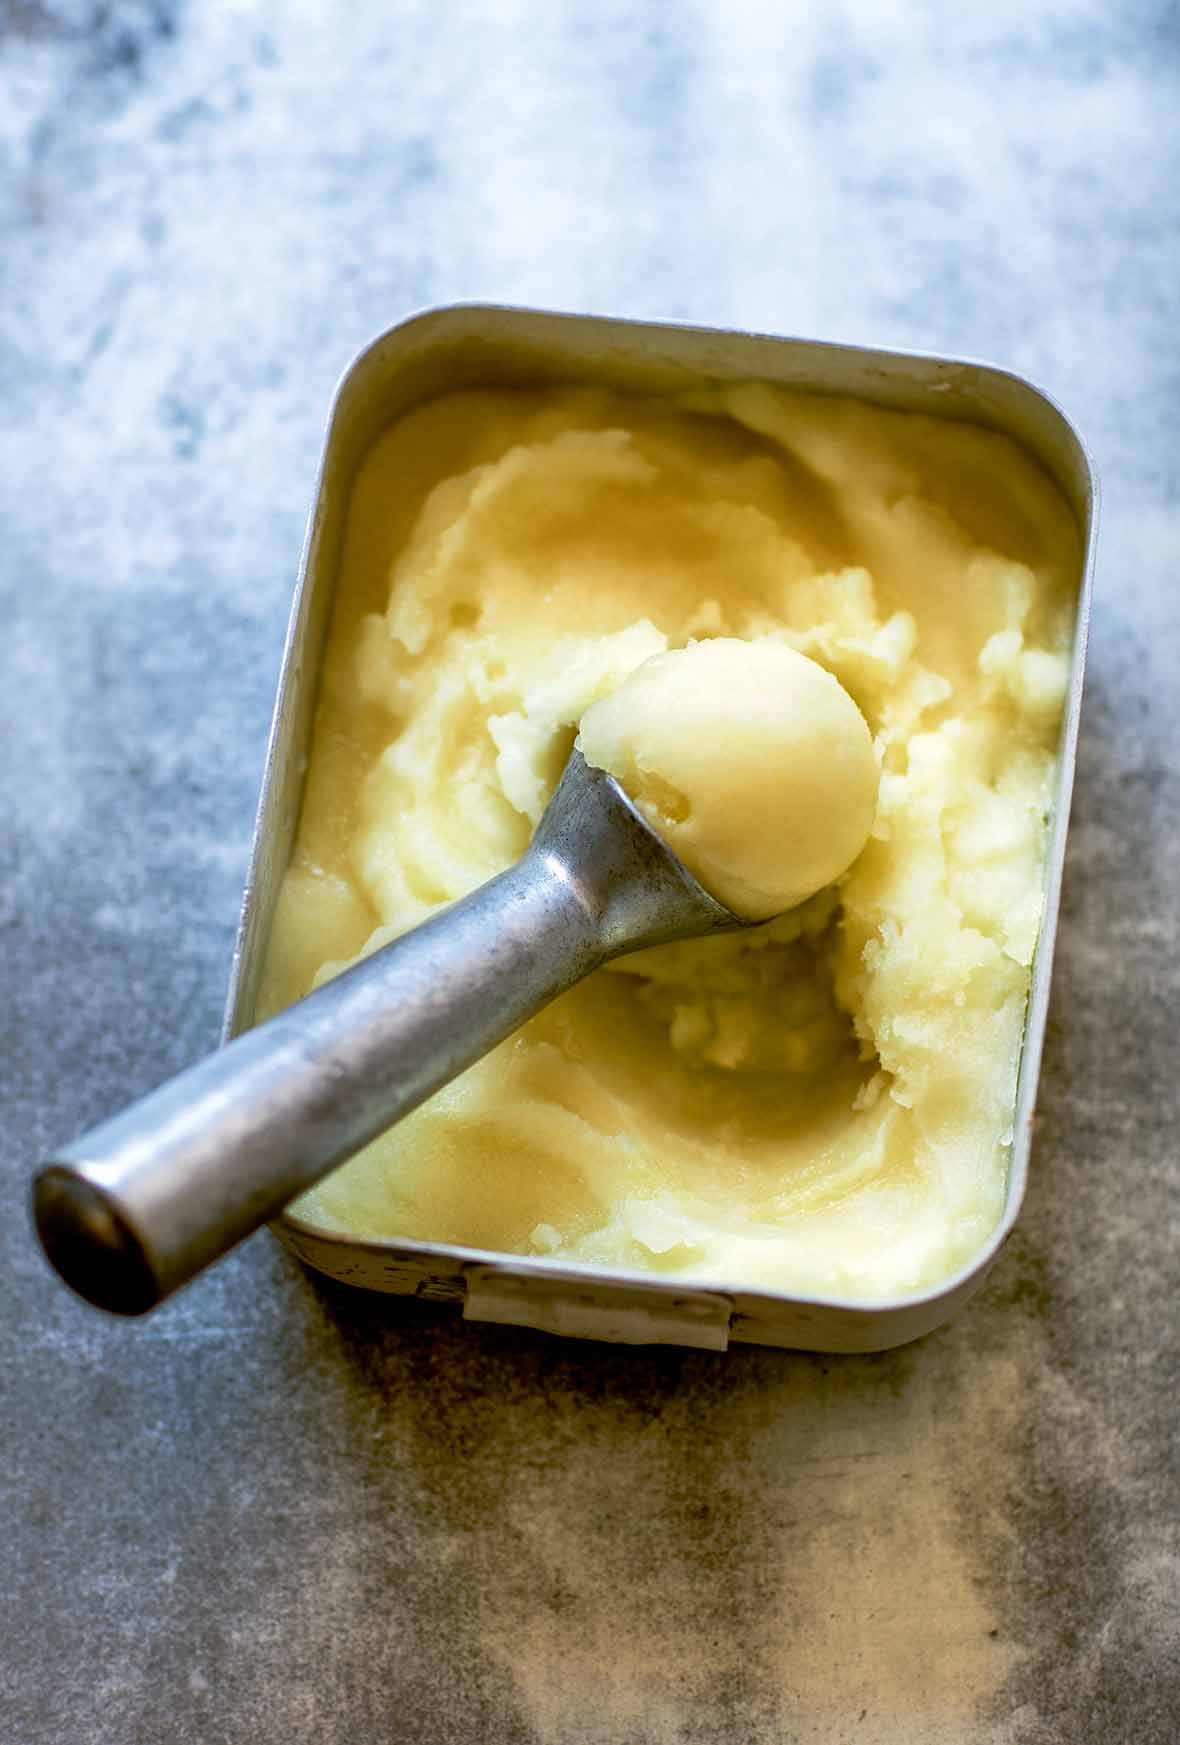 A metal container filled with tart lemon sorbet and a metal ice cream scoop resting inside.